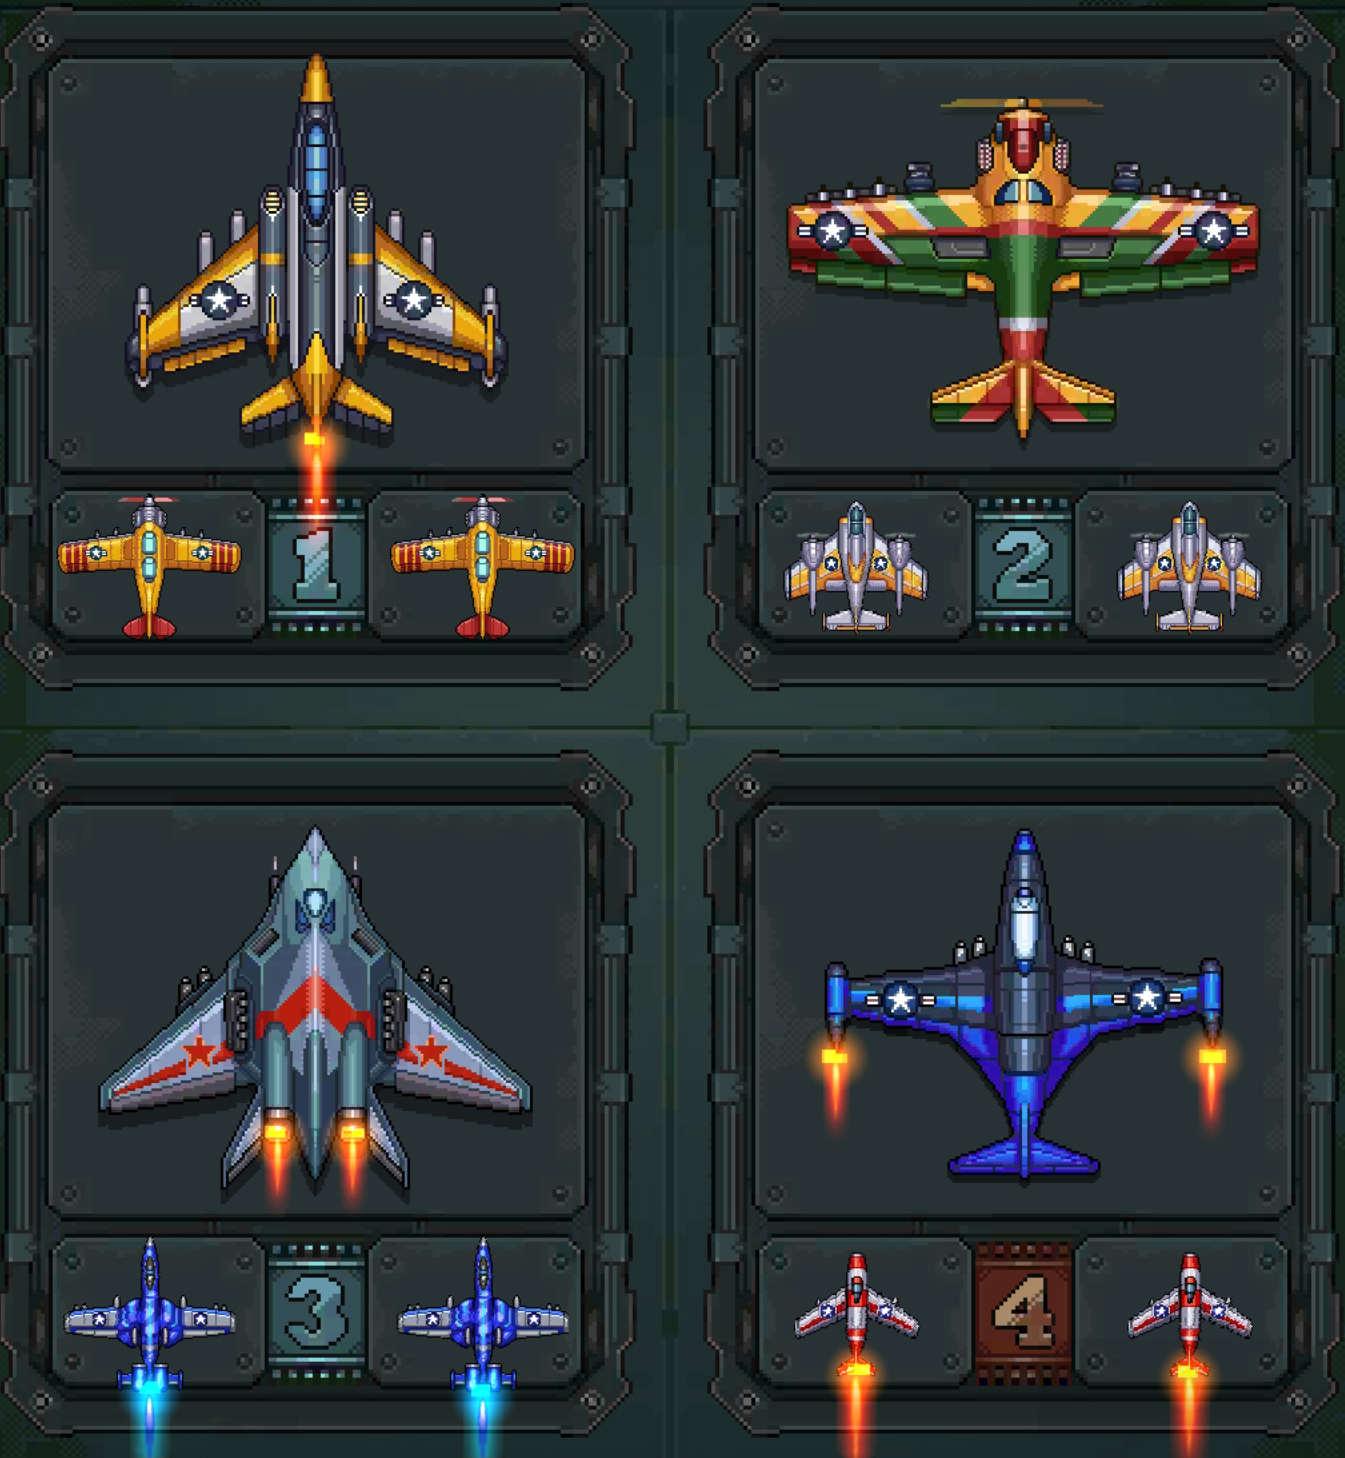 1945 Air Force: Airplane games – Apps no Google Play